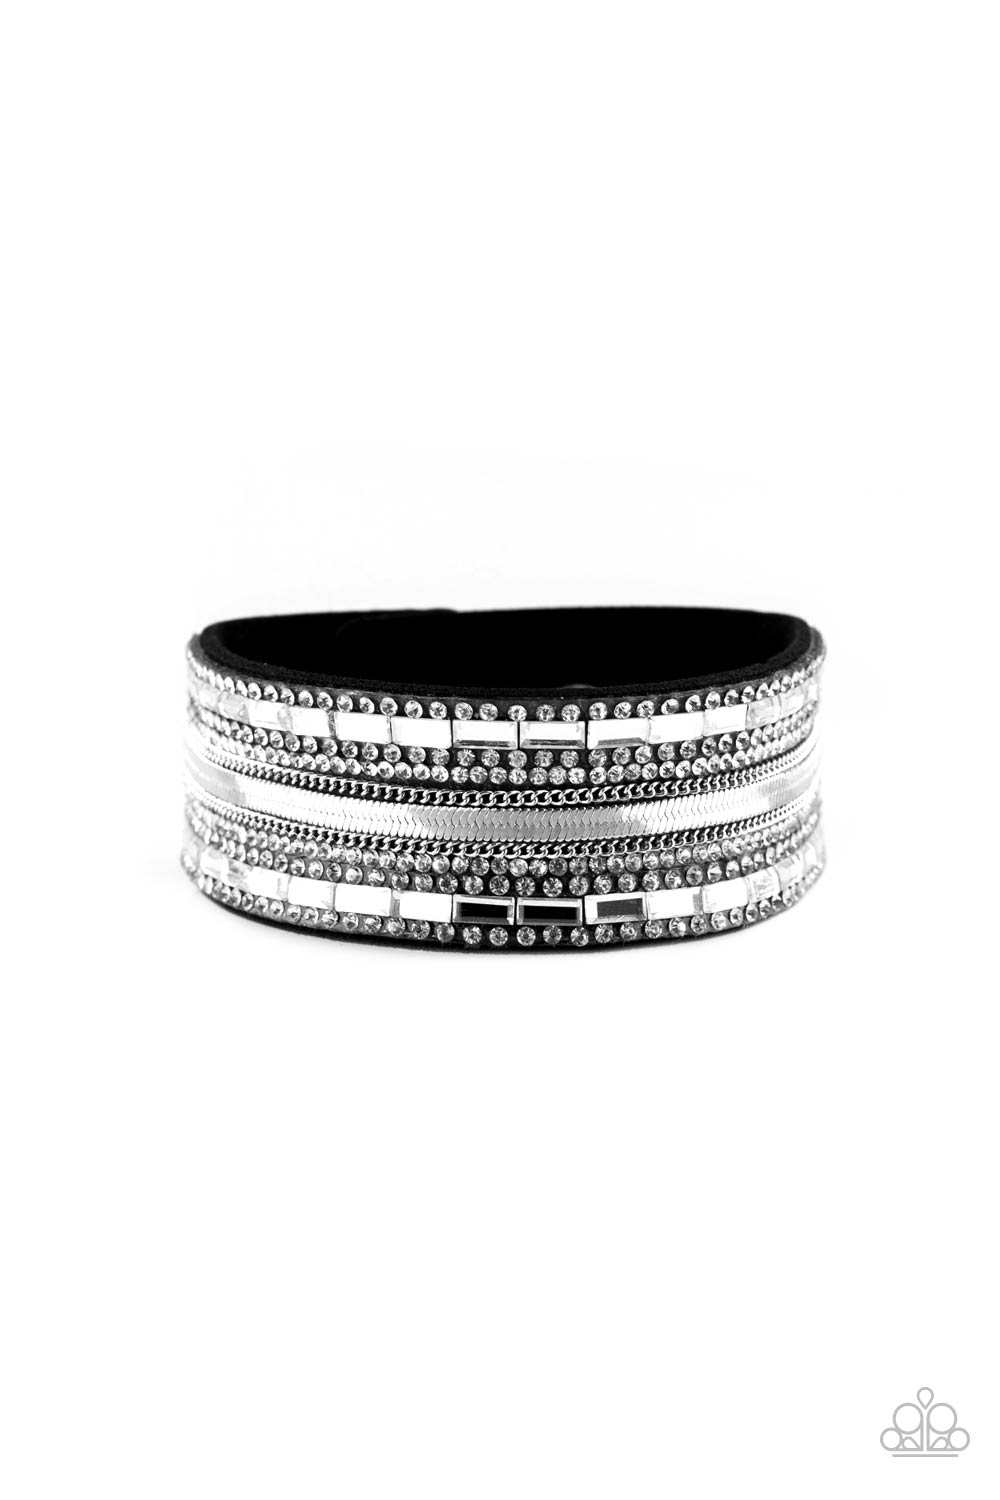 Mismatched silver chains, glassy emerald-cut, and glittery white rhinestones are encrusted along a thick black suede band for a sassy look. Features an adjustable snap closure.